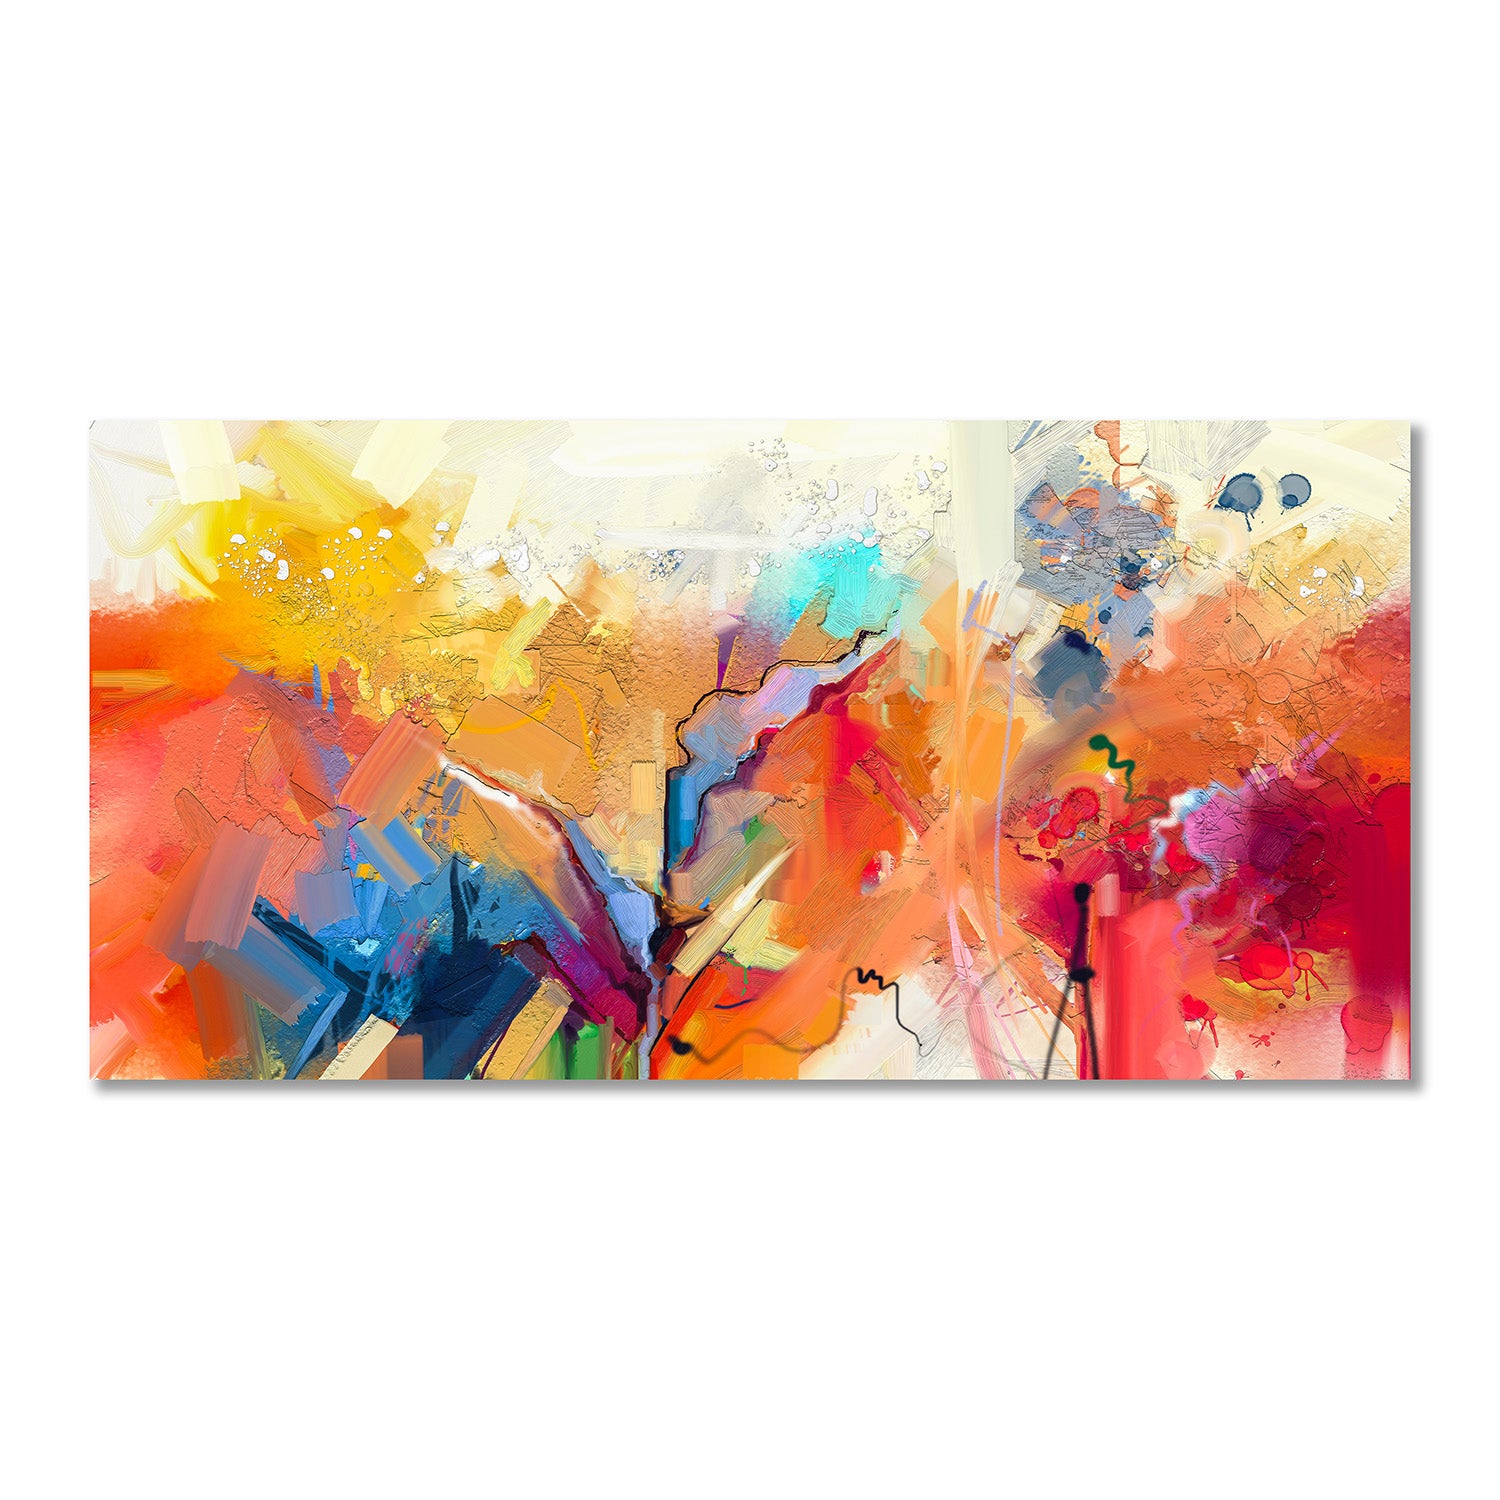 Colors of Life - Unframed Canvas Painting